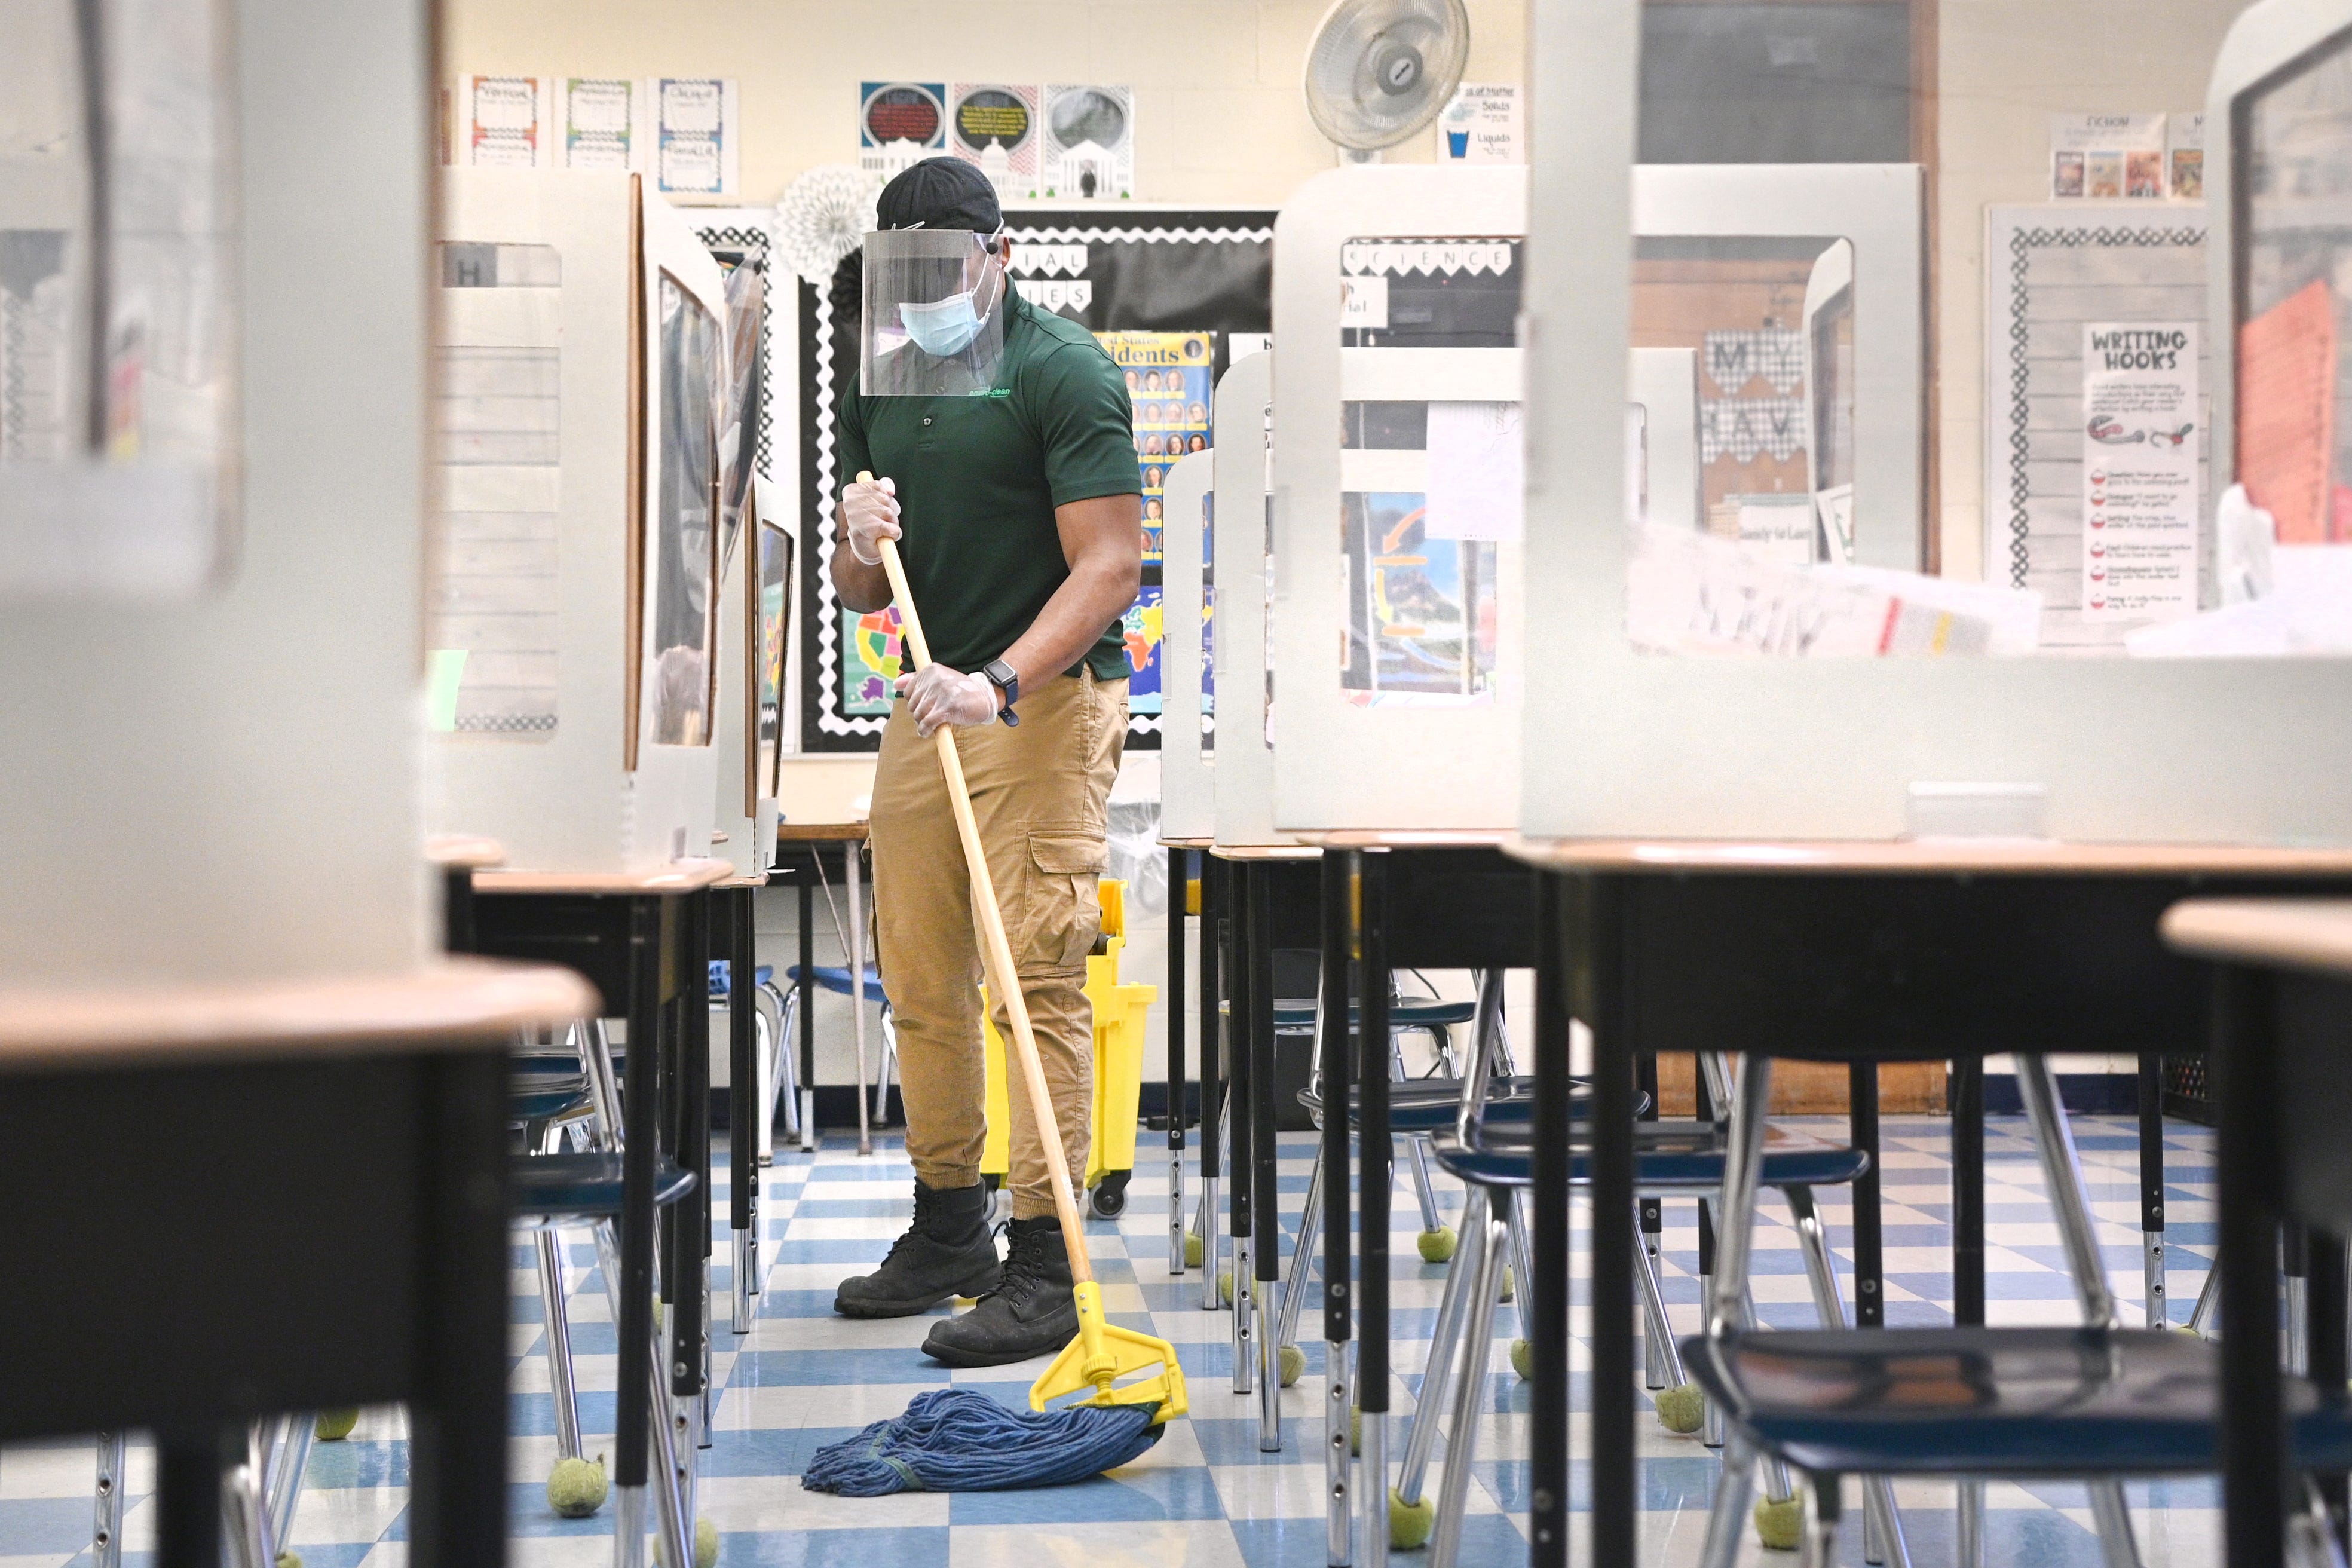 Johnathan Land mops a classroom floor at Bedford Elementary School in Dearborn Heights